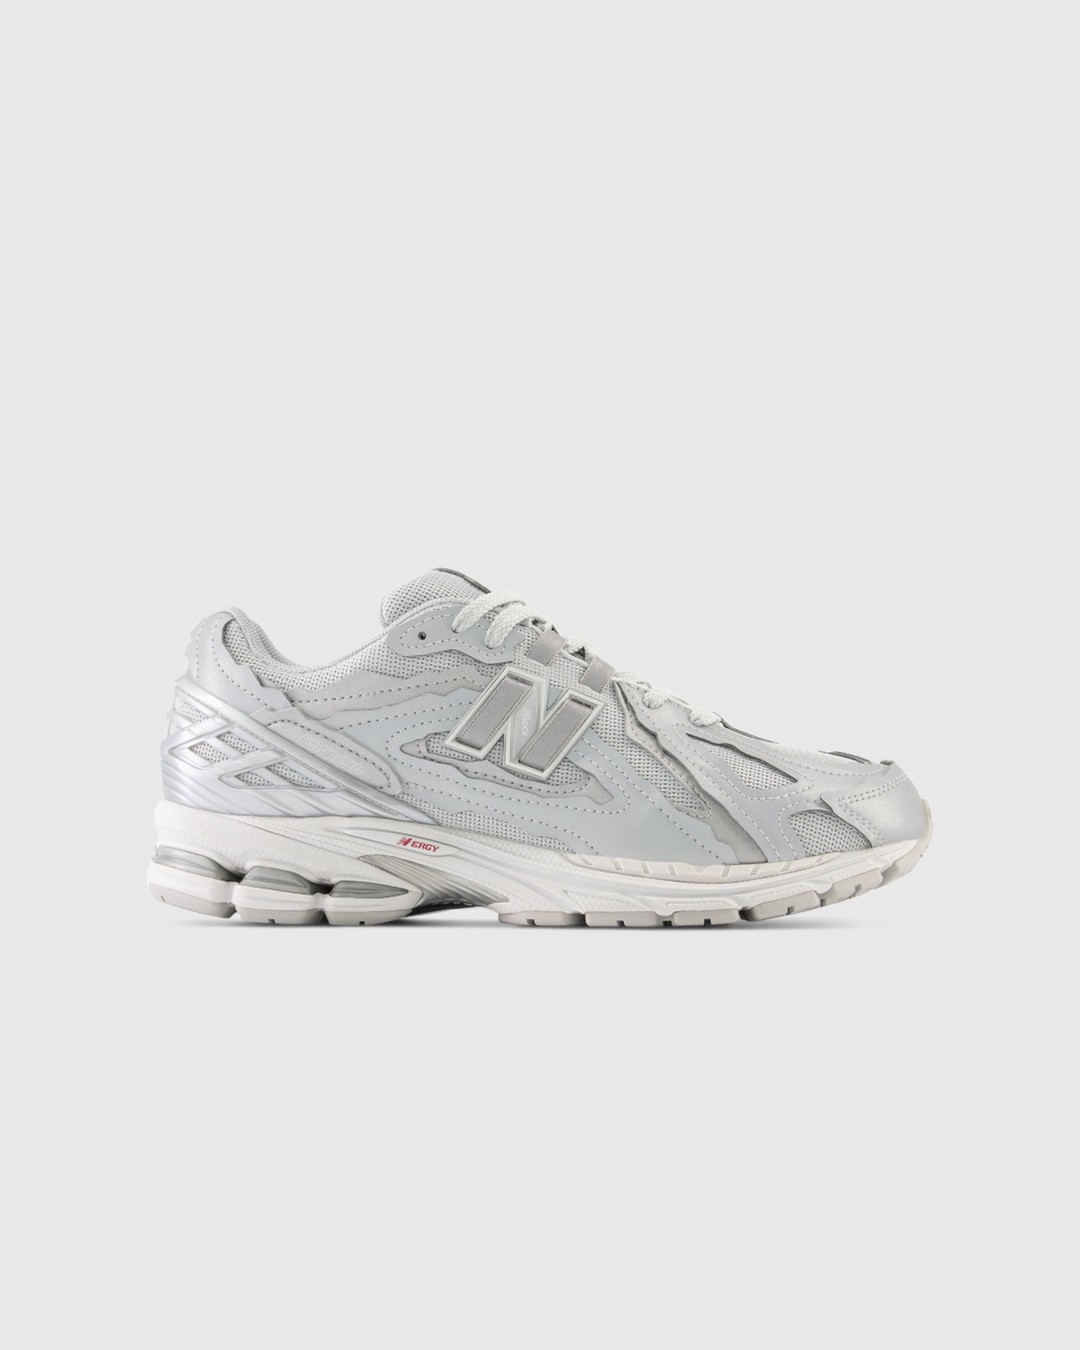 New Balance – 1906 DH Silver Metallic - Sneakers - Silver - Image 1